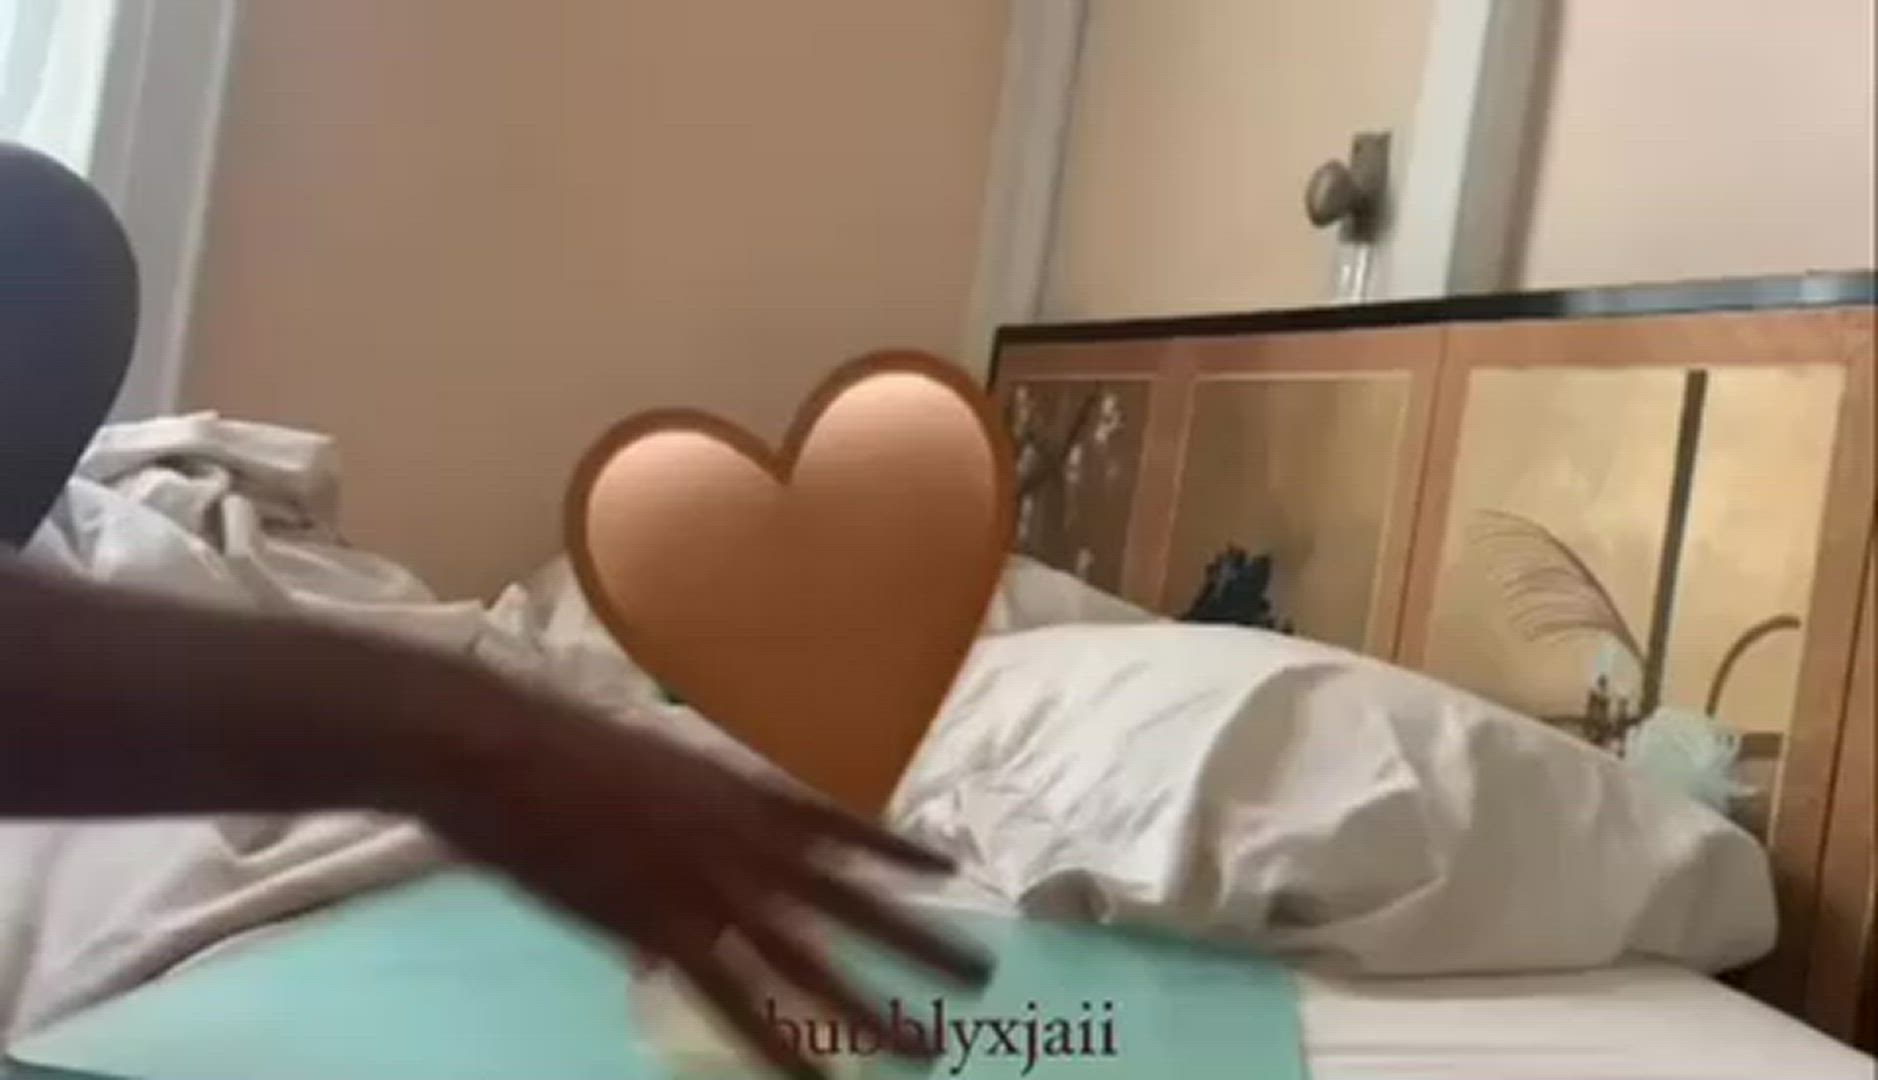 Creamy porn video with onlyfans model bubblyxjaii <strong>@bubblyxjaii</strong>